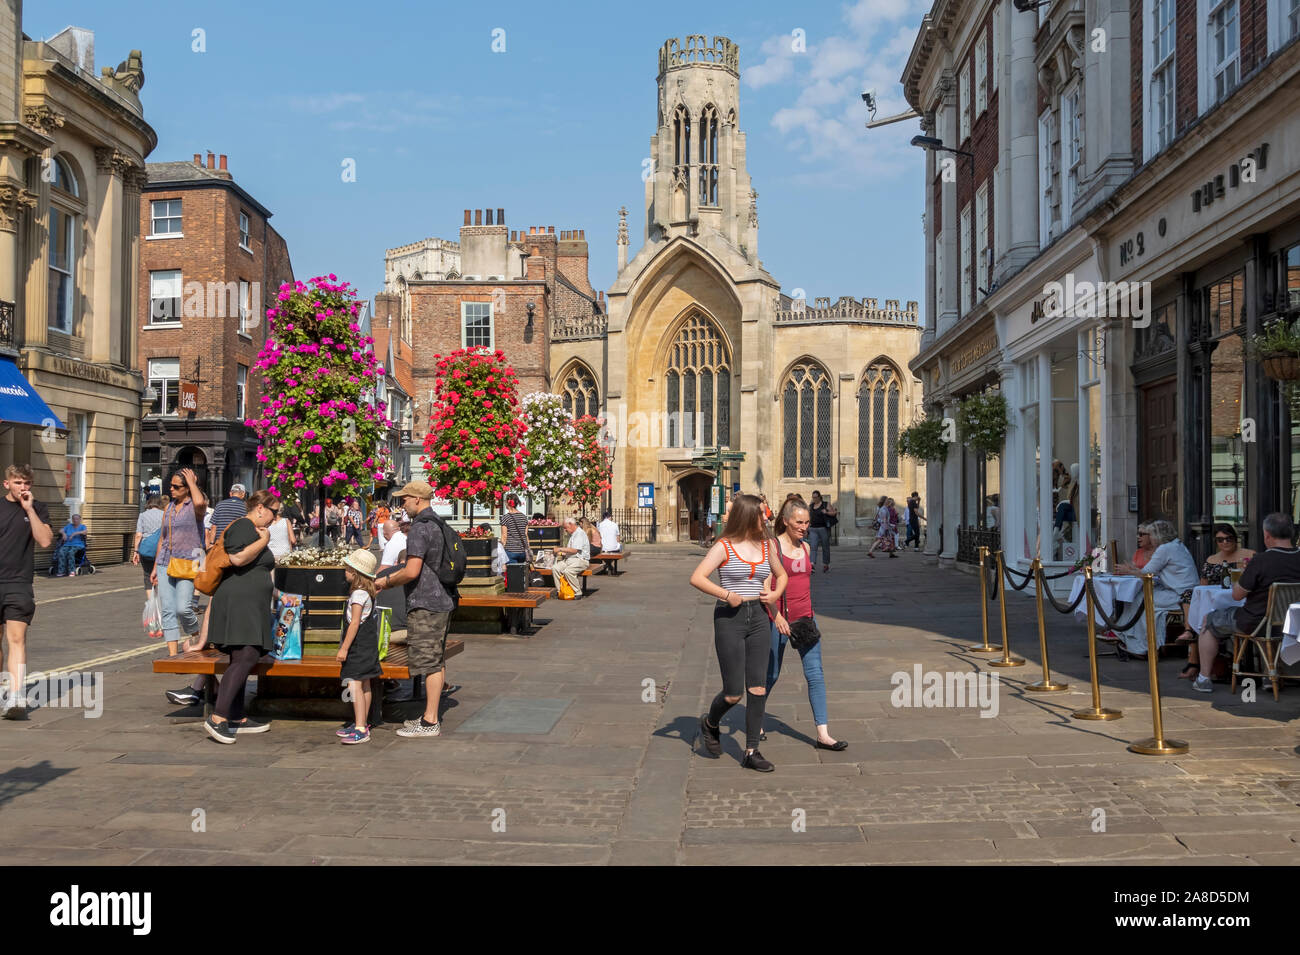 People tourists visitors in St Helen's Square in summer York city centre North Yorkshire England UK United Kingdom GB Great Britain Stock Photo